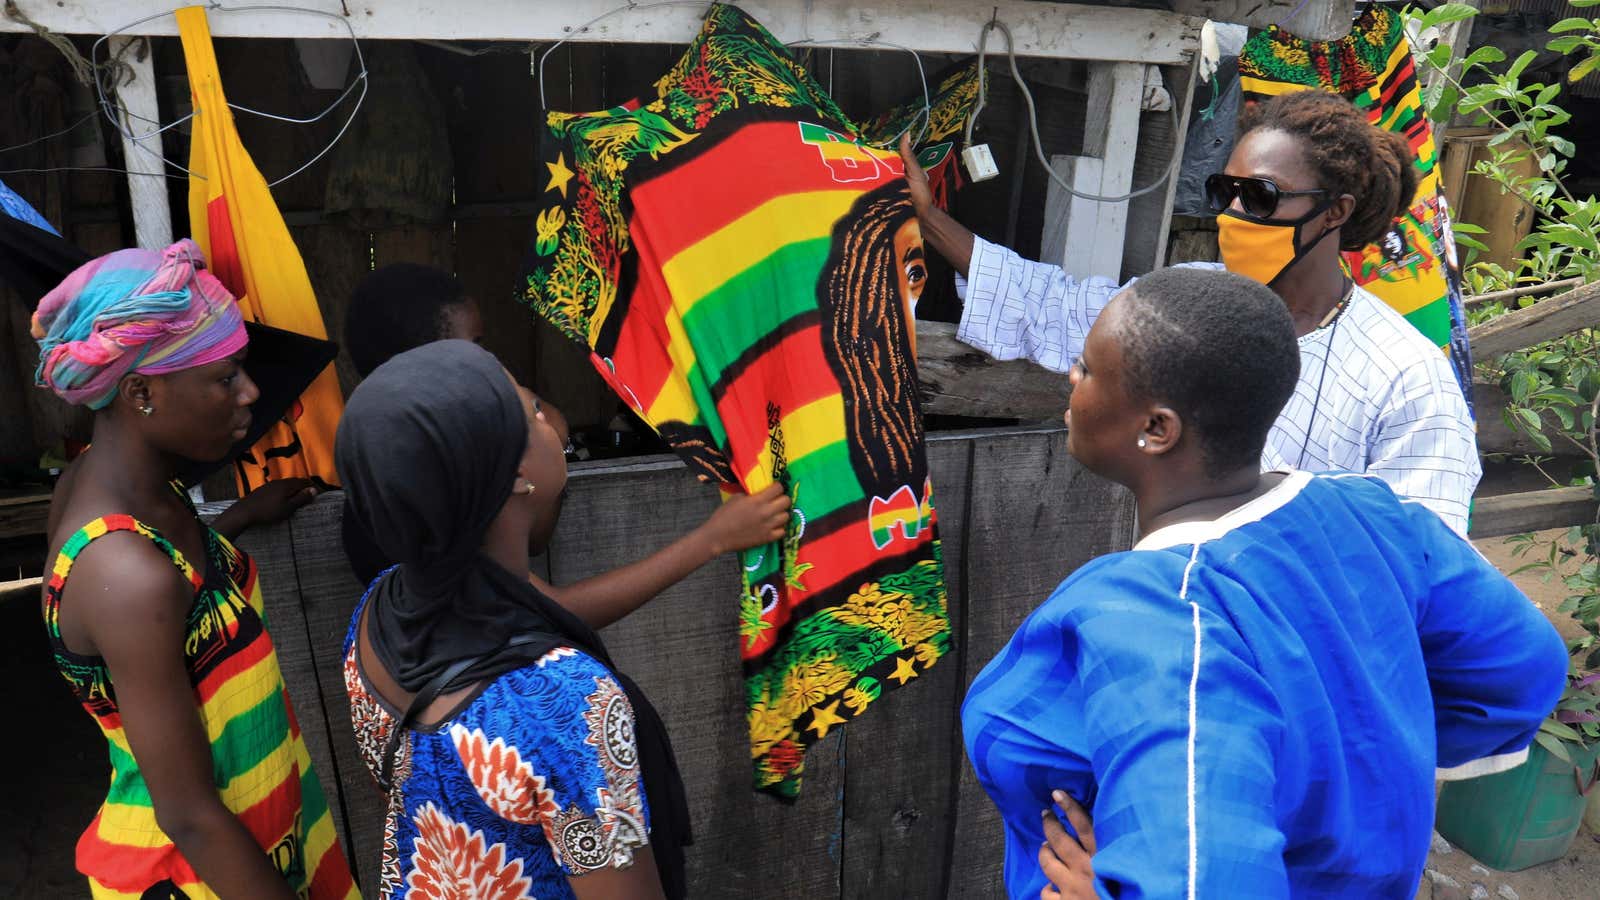 A growing number of Ivorian entrepreneurs are selling their wares through social media, drawing the attention of the government, which has yet to regulate ecommerce in the country.